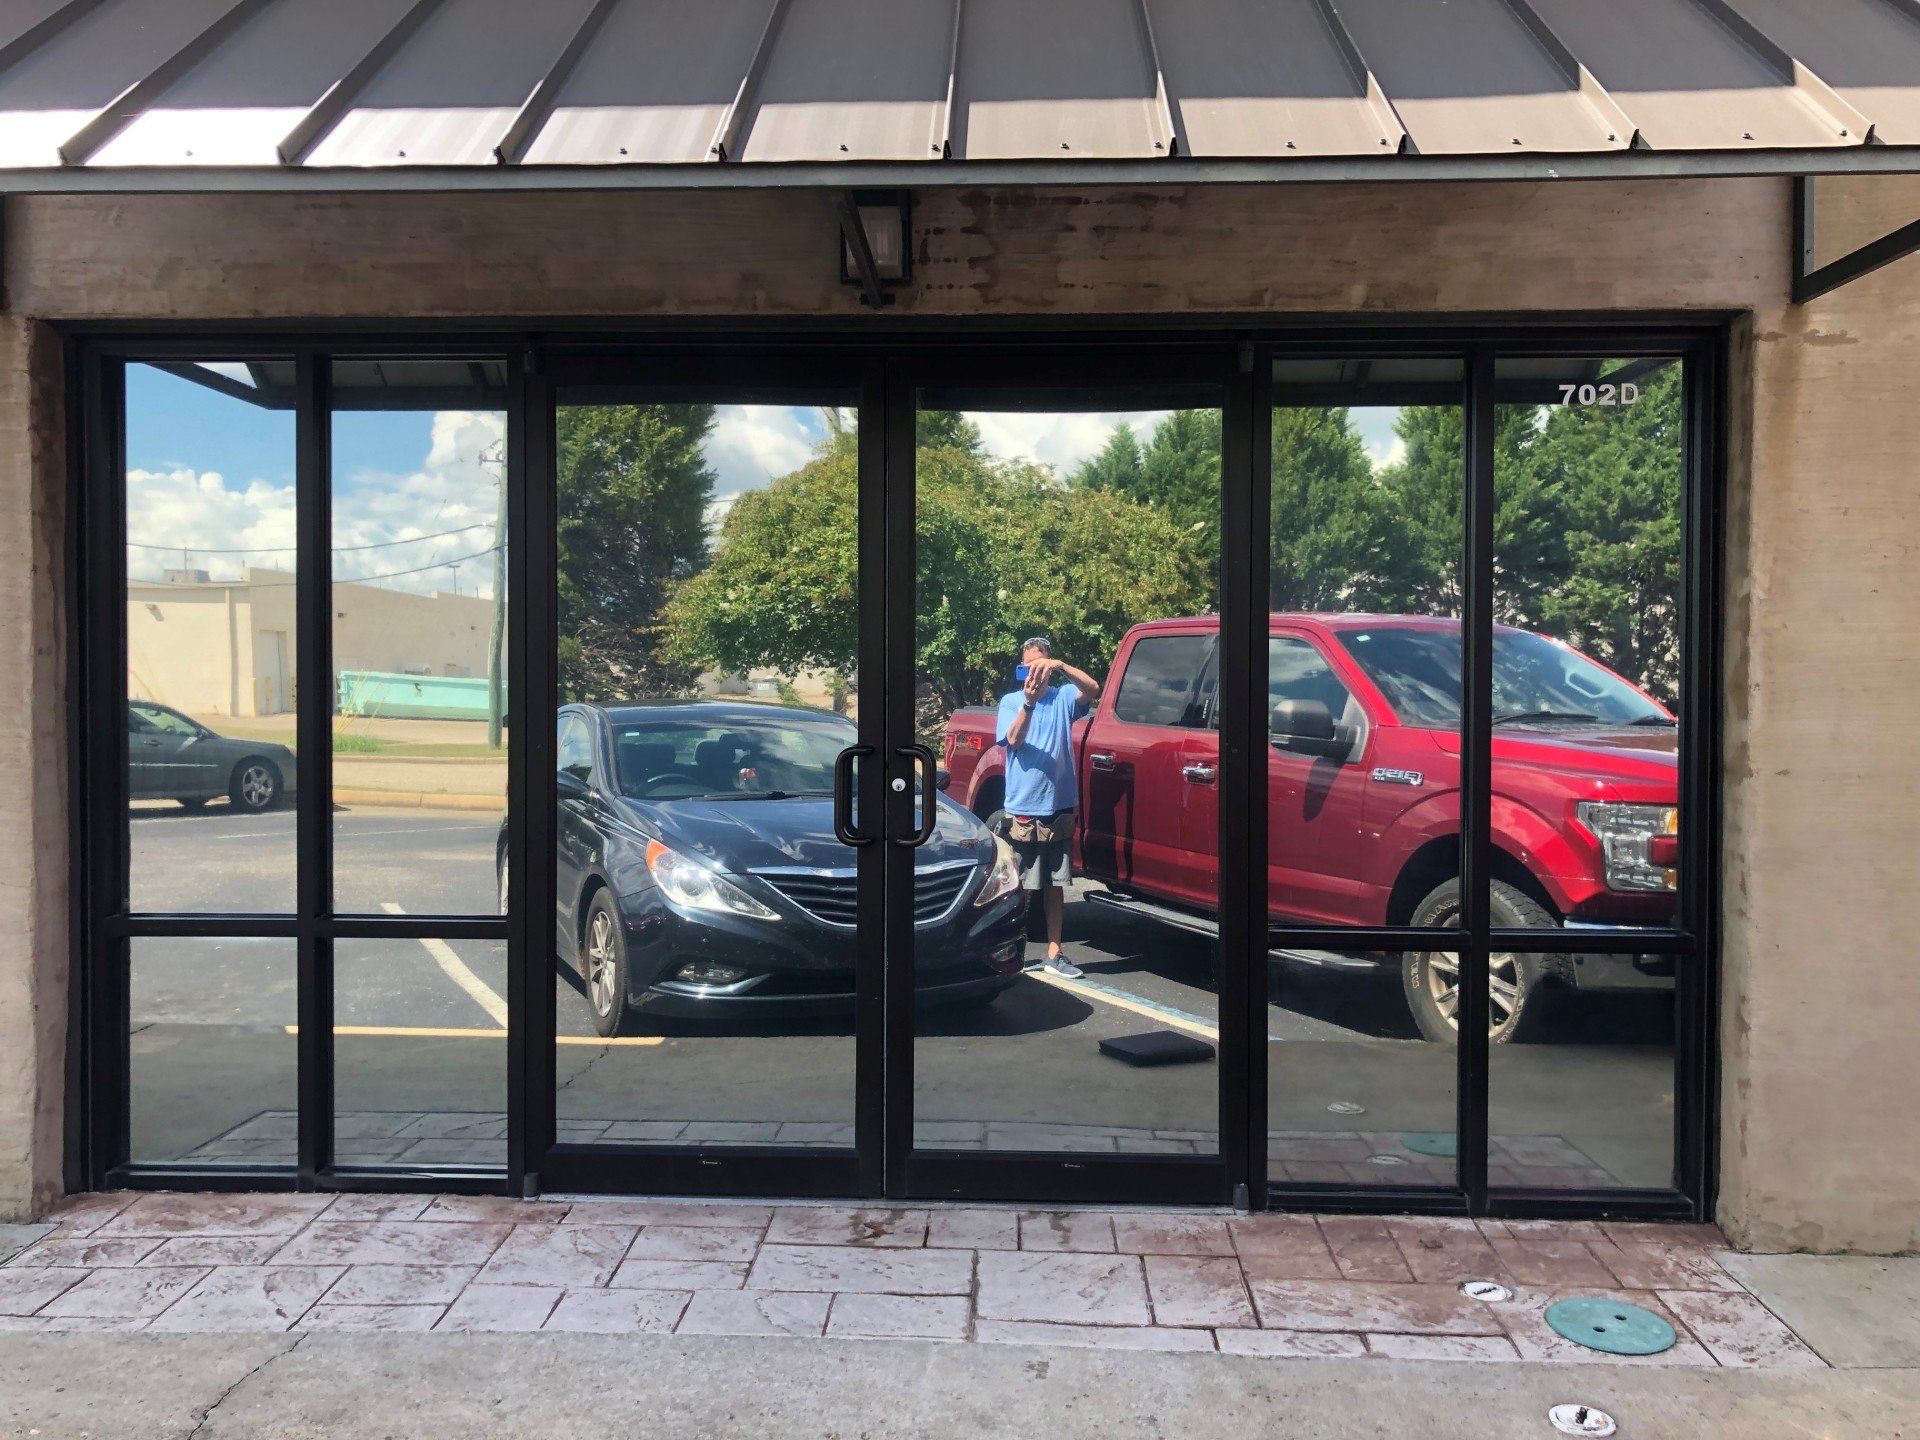 New Storefront windows of Business were spf tinted on 8-23-2019 in Prattville, AL